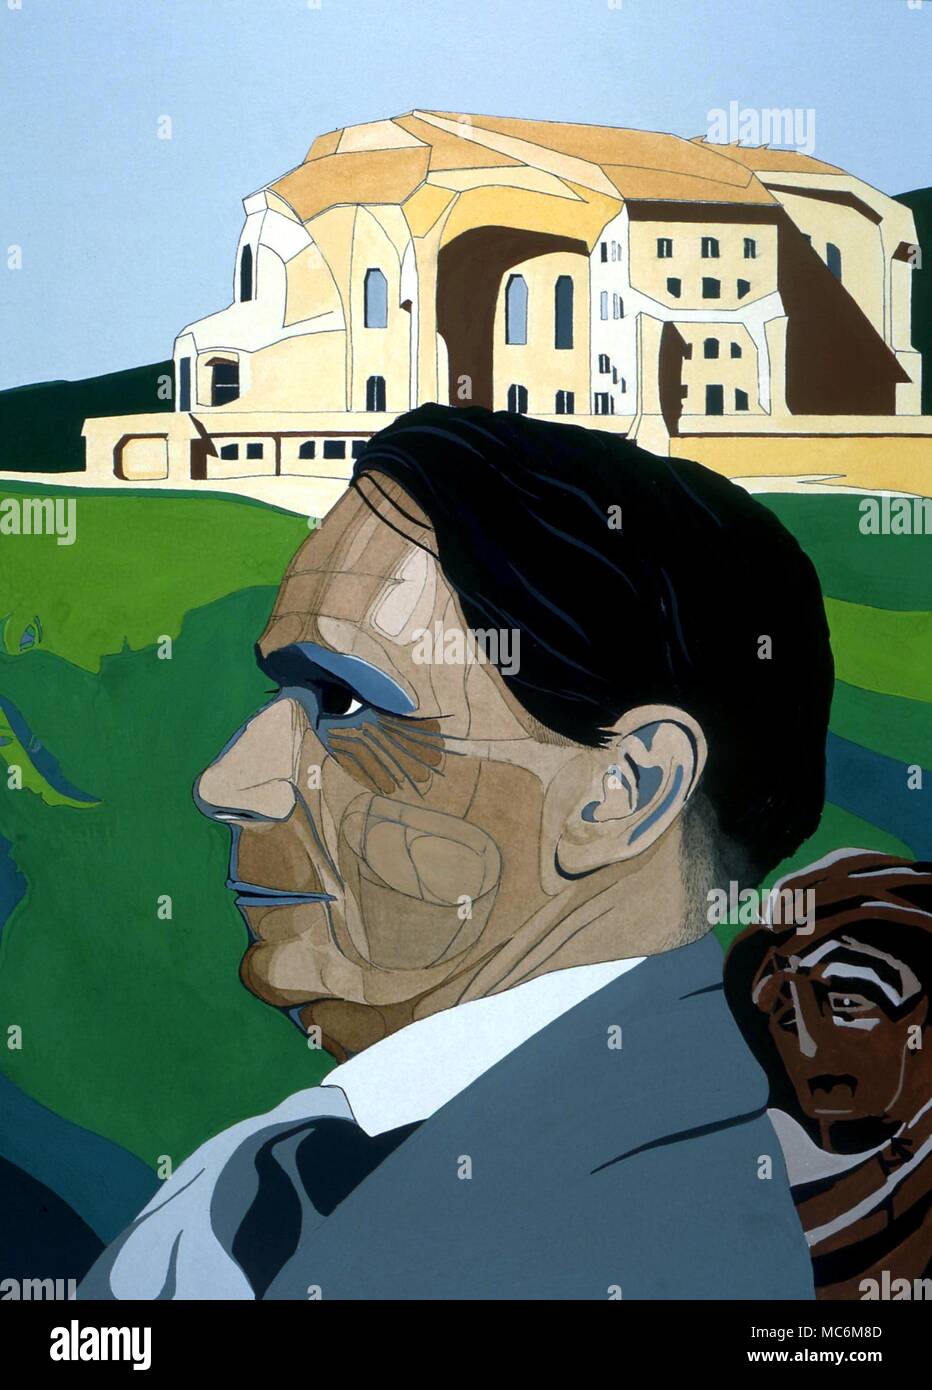 OCCULTISTS - RUDOLF STEINER. Portrait of the great modern esotericist Rudolf Steiner (1861-1925). Behind is the Goetheanum of Dornach, which he designed. In front, images of Lucifer and Ahriman. Portrait by John Bolton Stock Photo